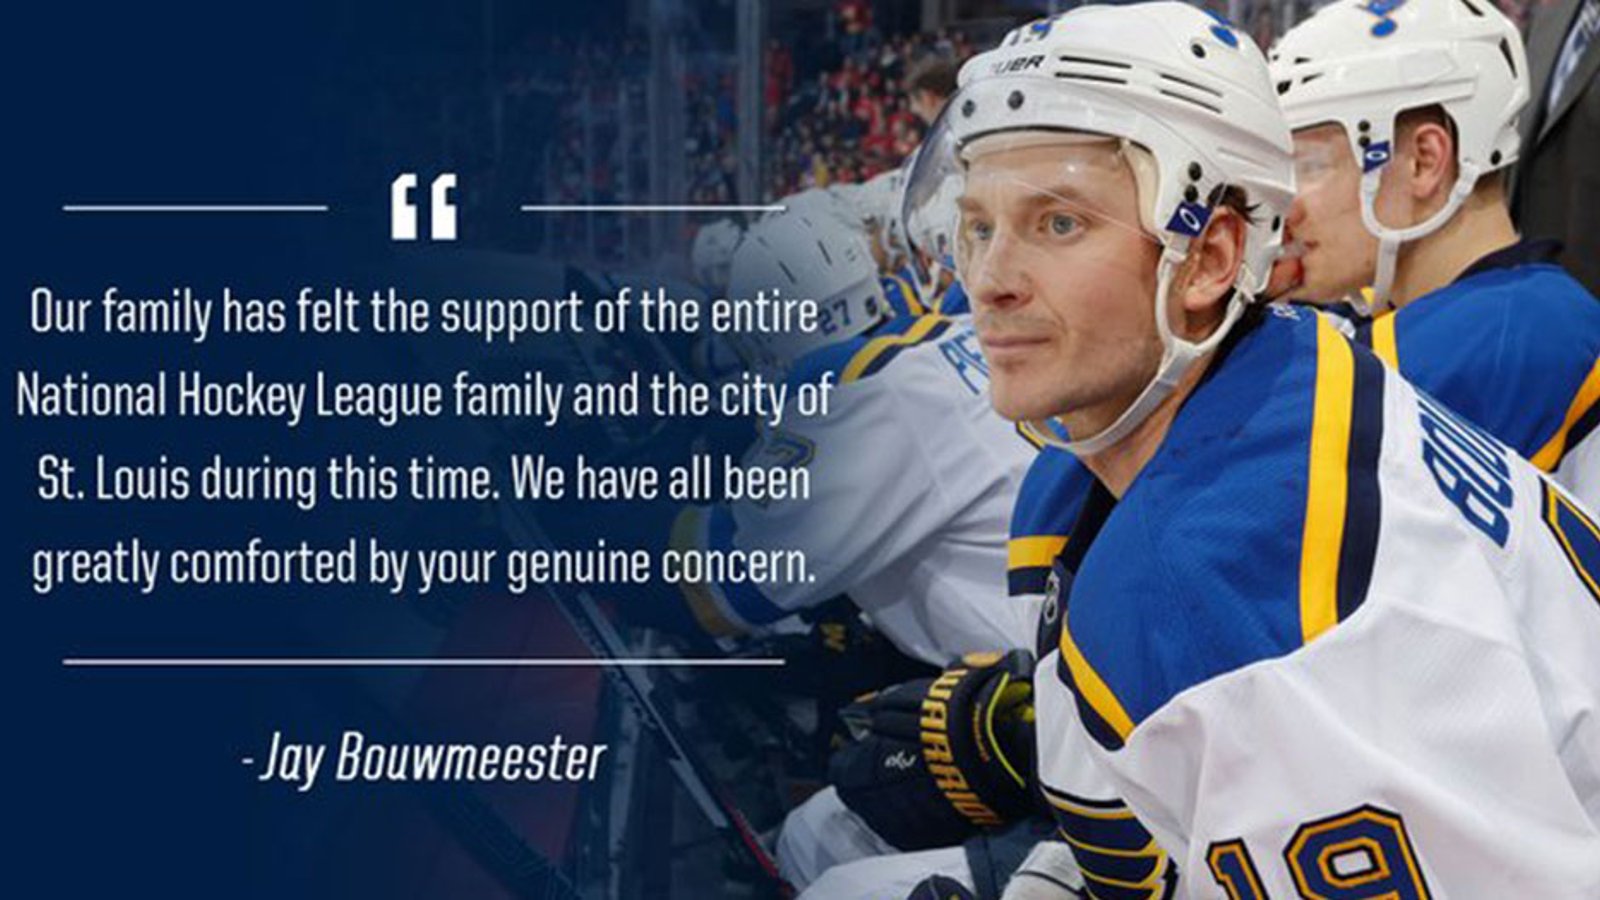 Bouwmeester praises medical staff in first public statement since cardiac incident